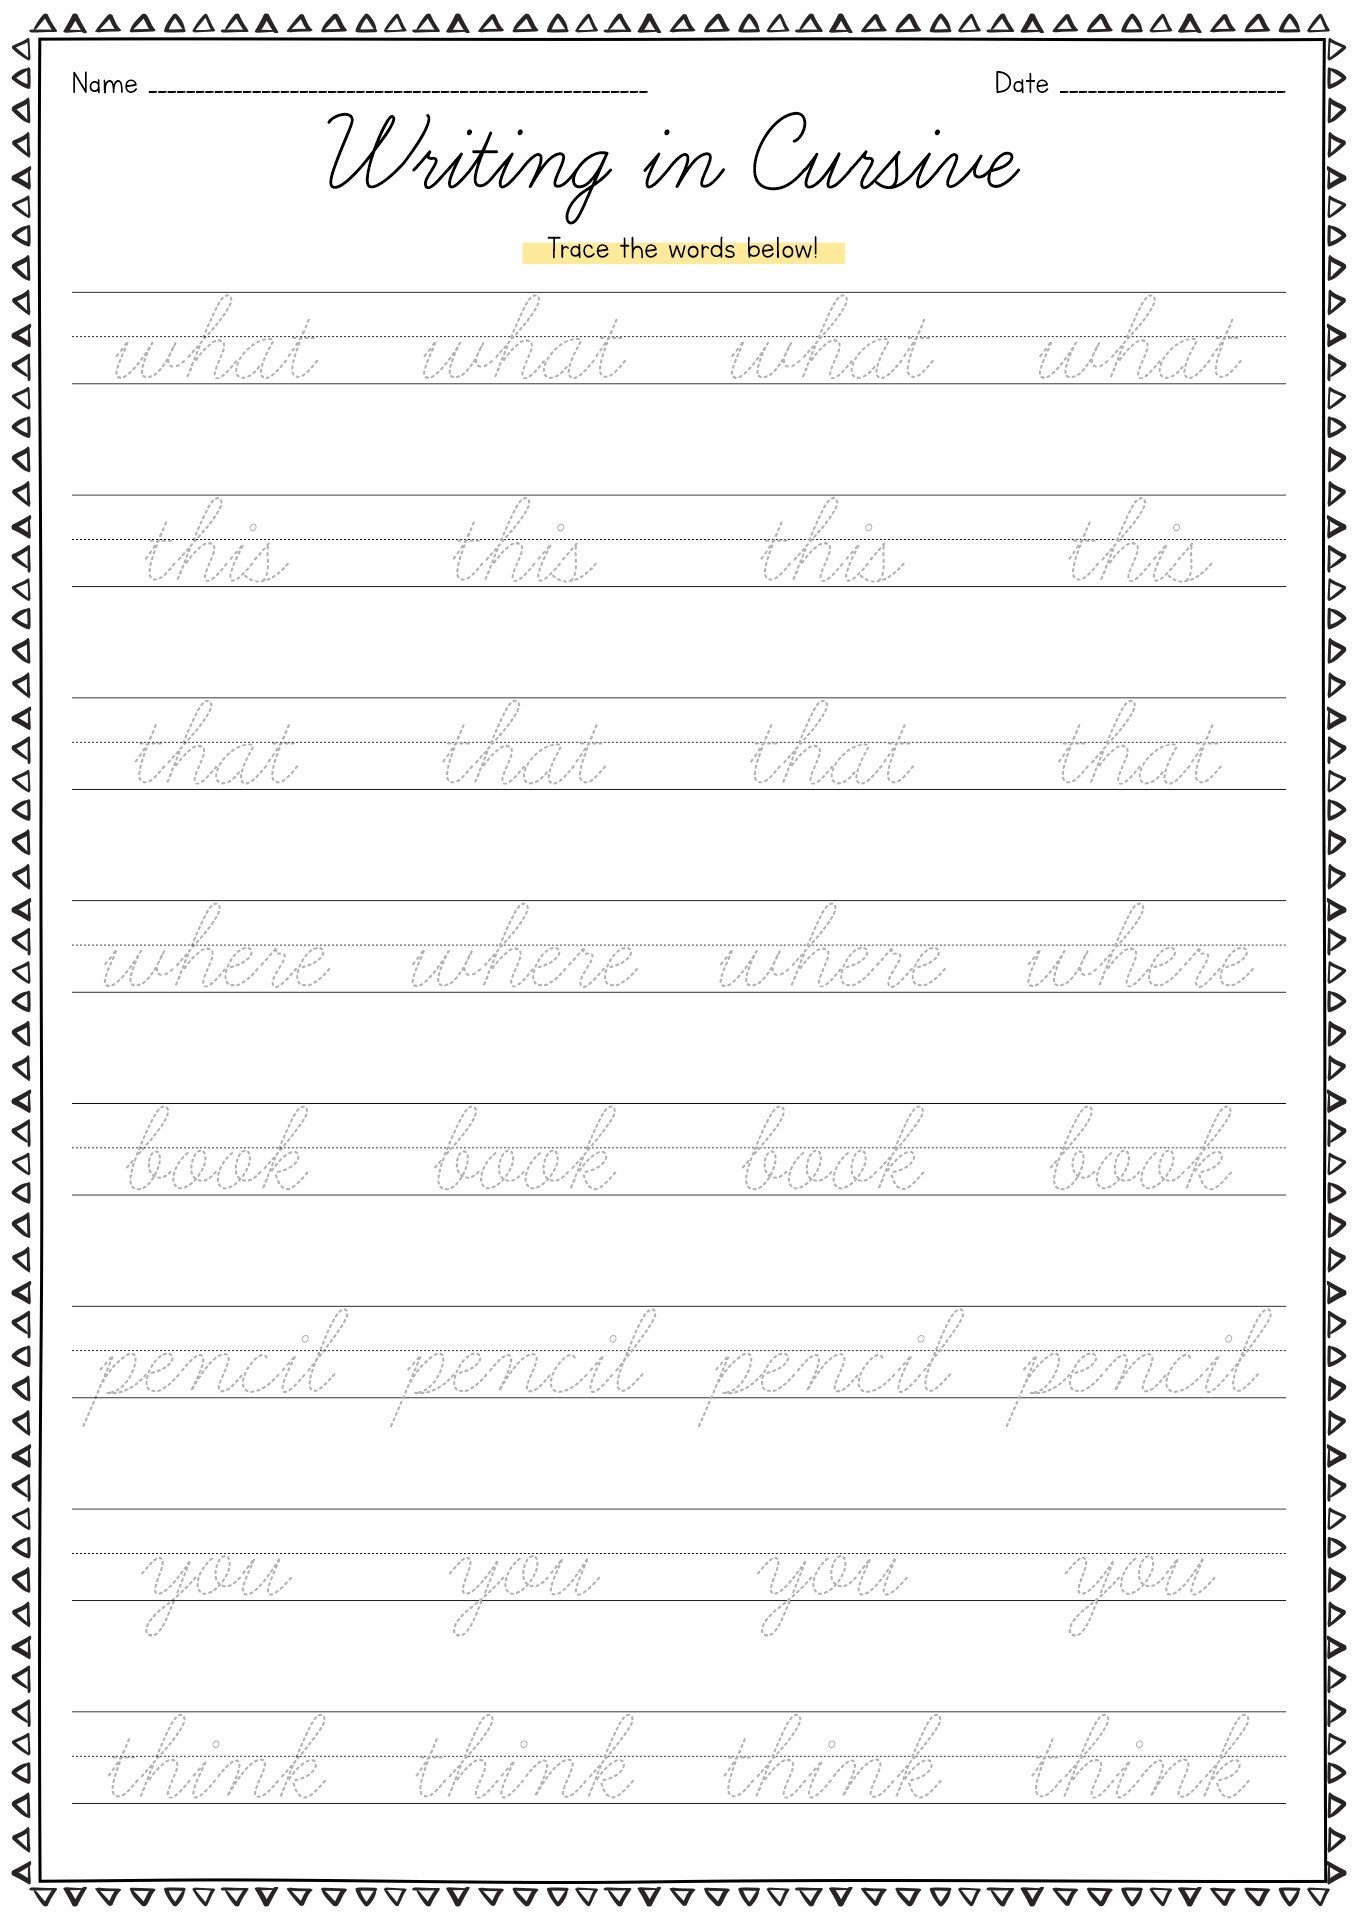 worksheets-to-practice-handwriting-for-adults-penmanship-worksheets